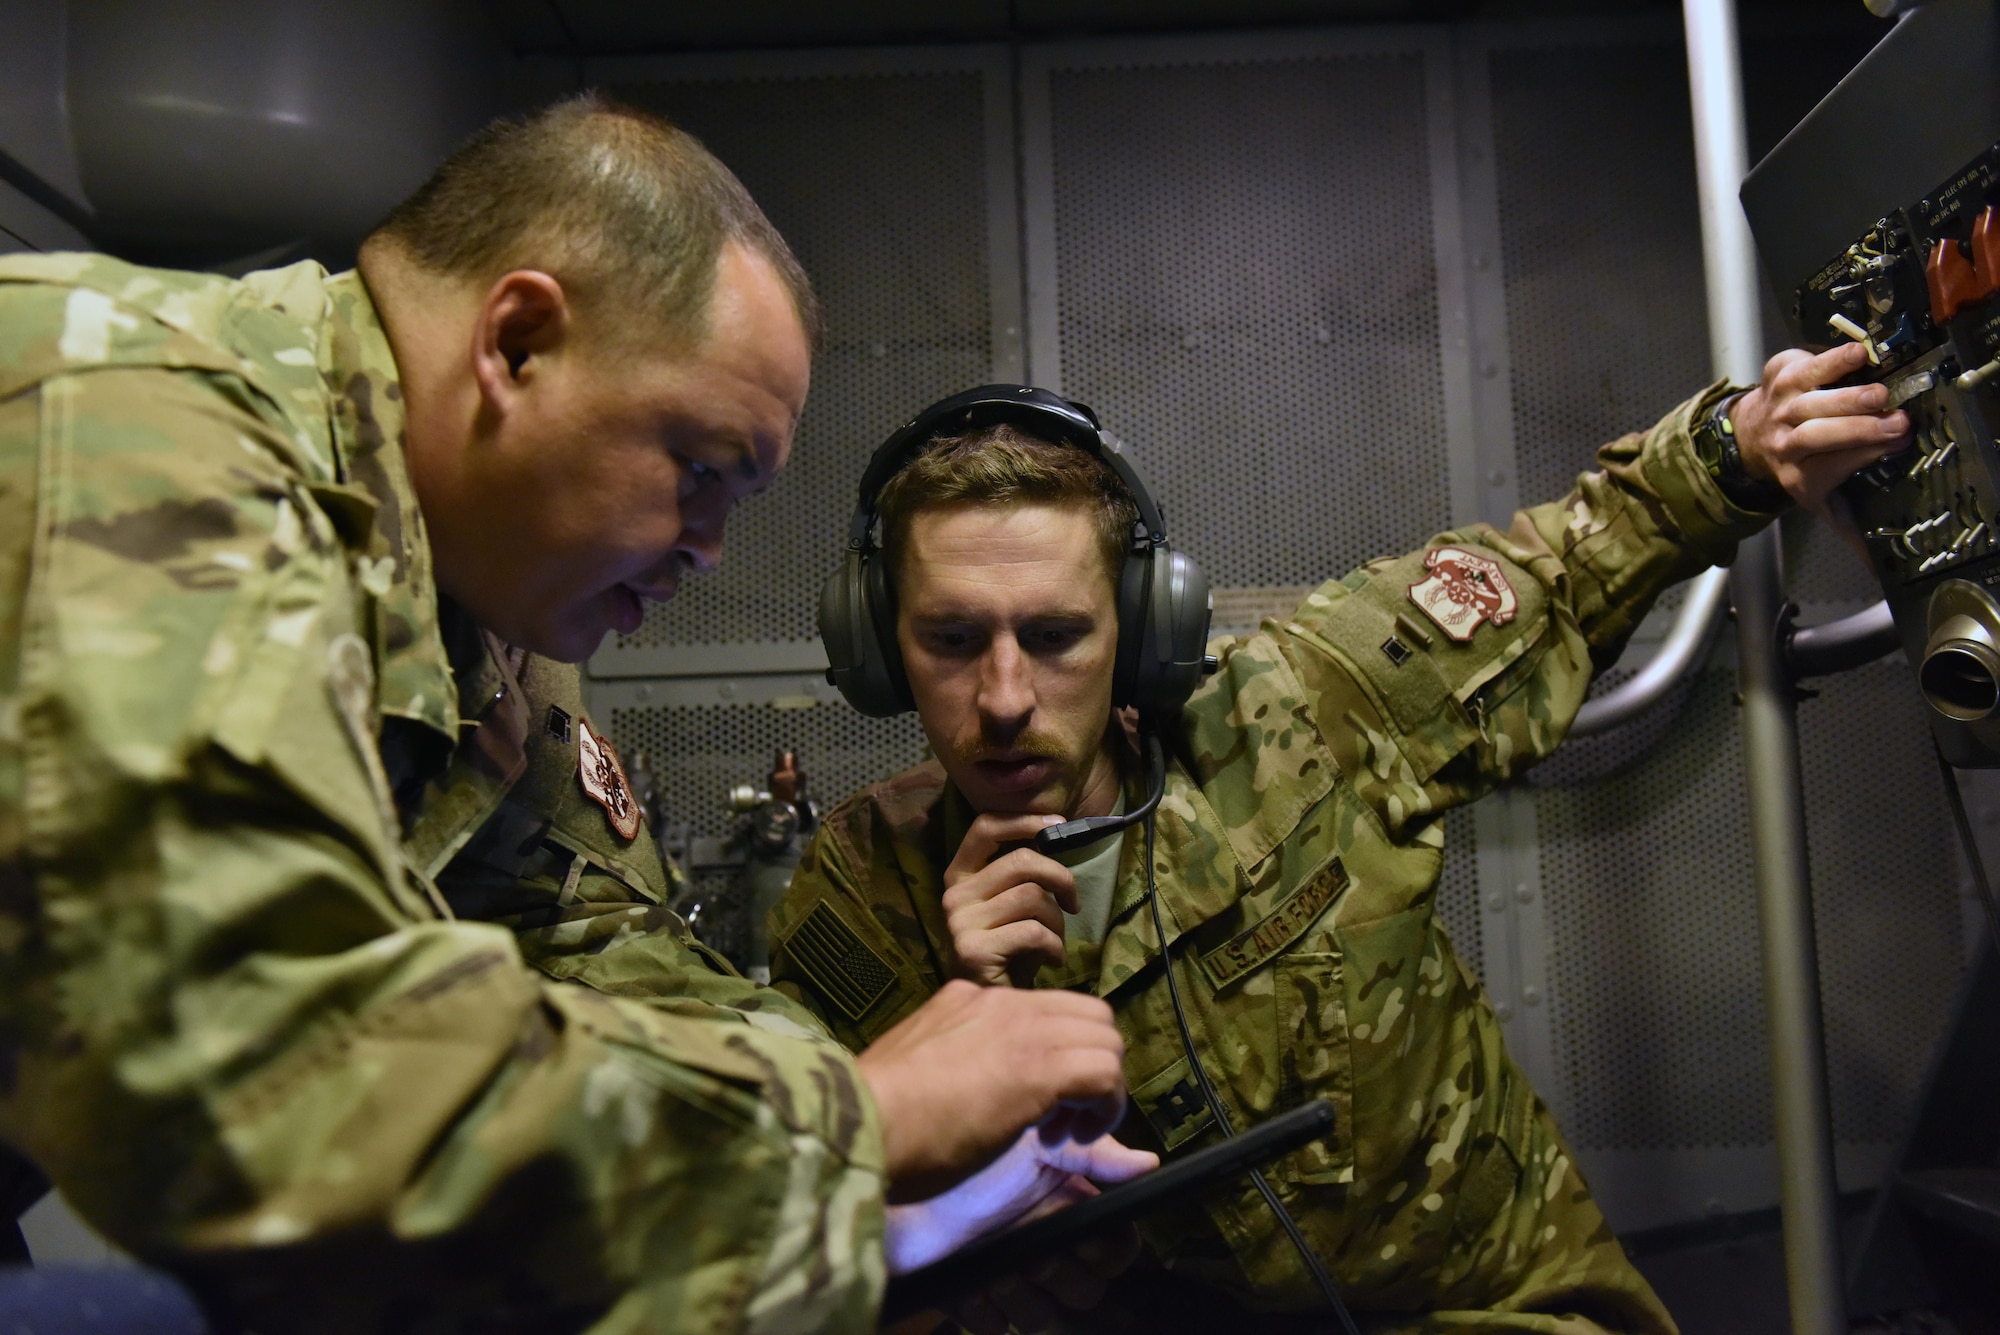 Capt. Joe, right, assists boom operator Tech. Sgt. Fritz in trouble shooting an issue in a KC-10 Extender boom pod in the air over Syria, Sept. 13, 2017.